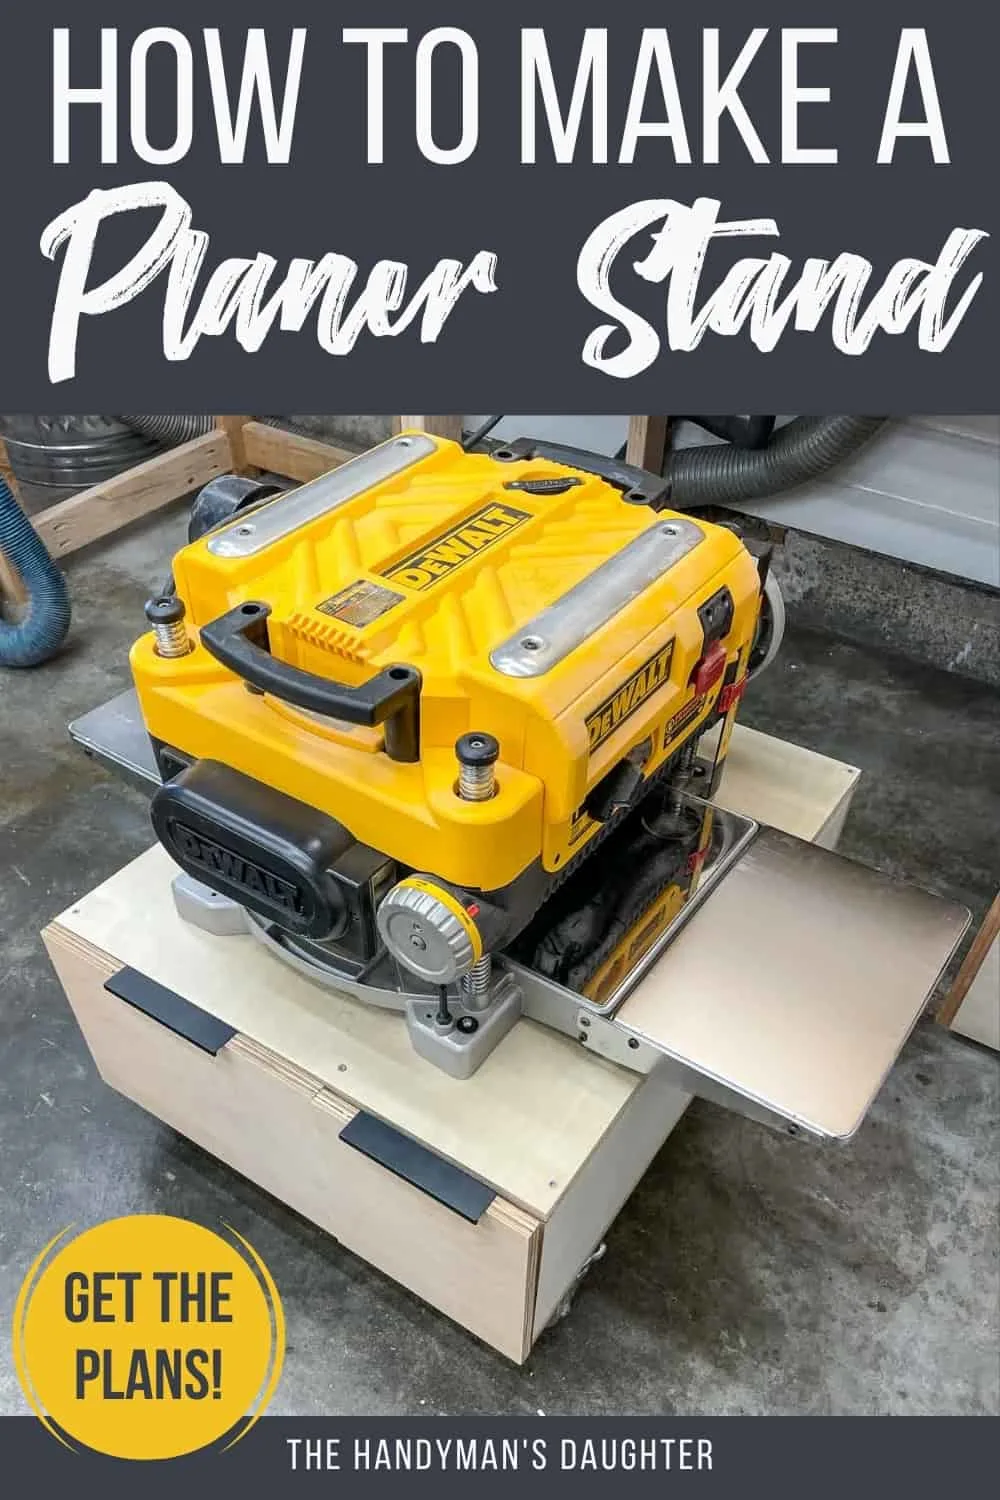 Easy DIY Planer Stand with Storage - The Handyman's Daughter